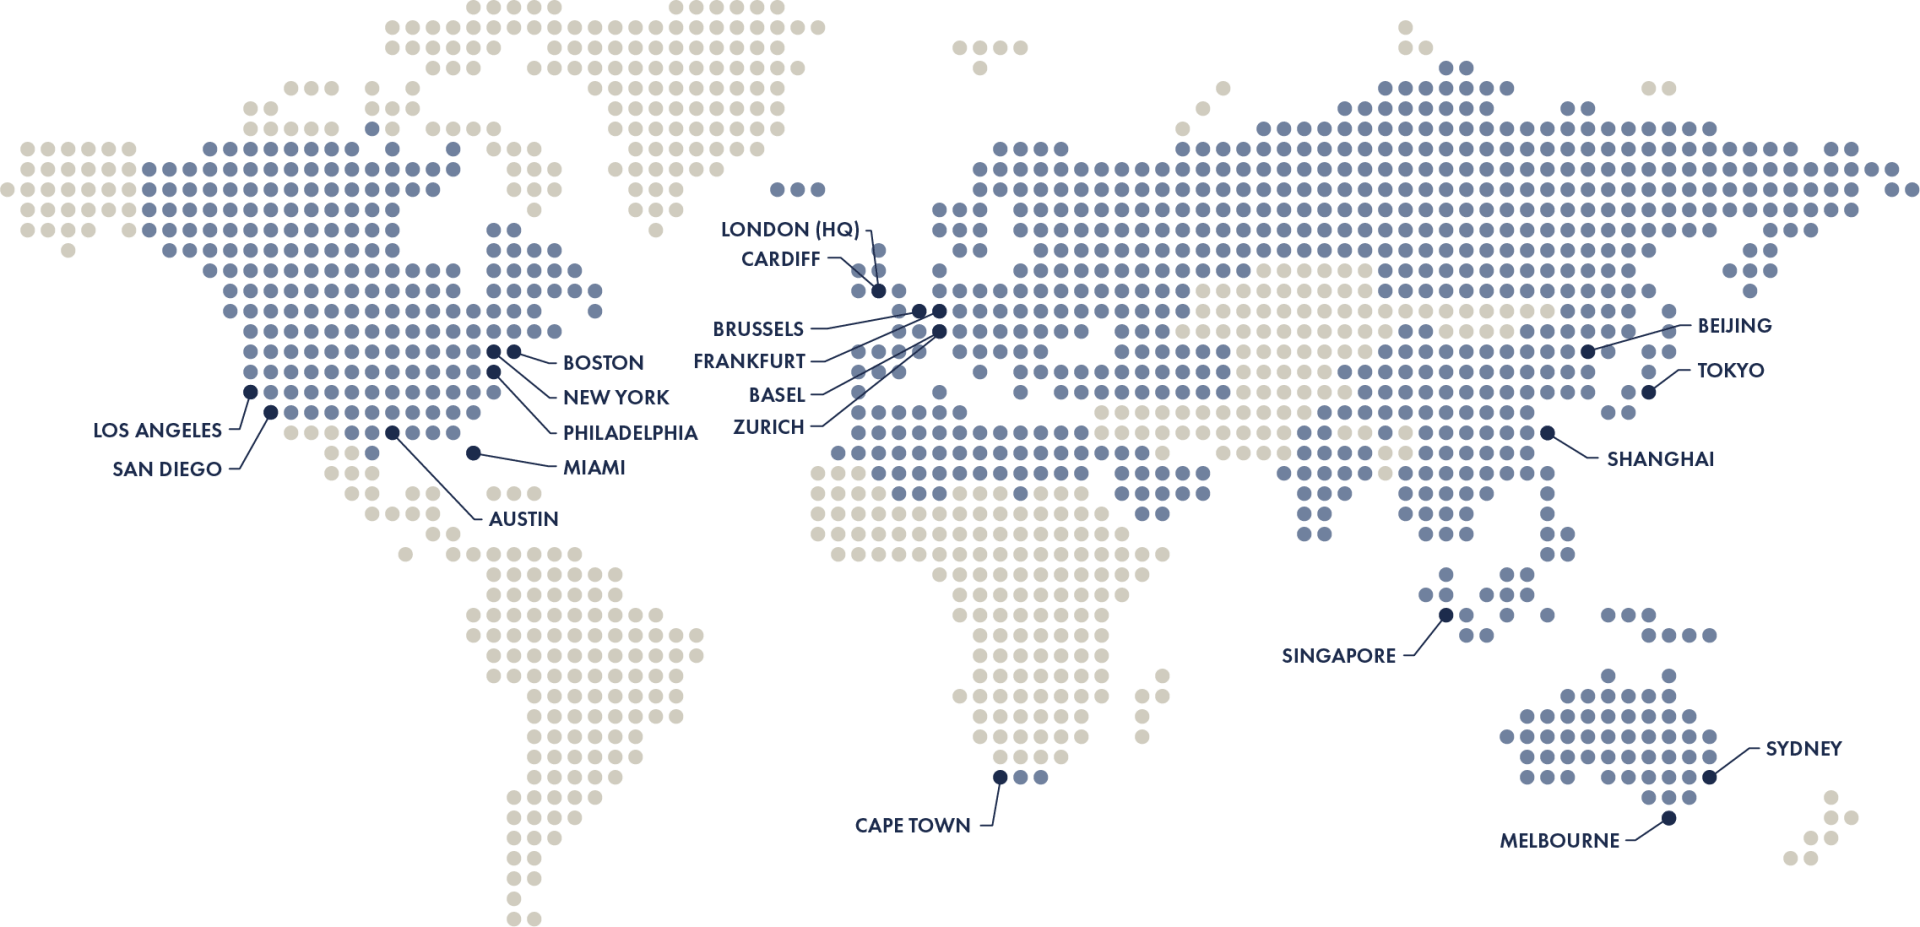 Proclinical's international office locations